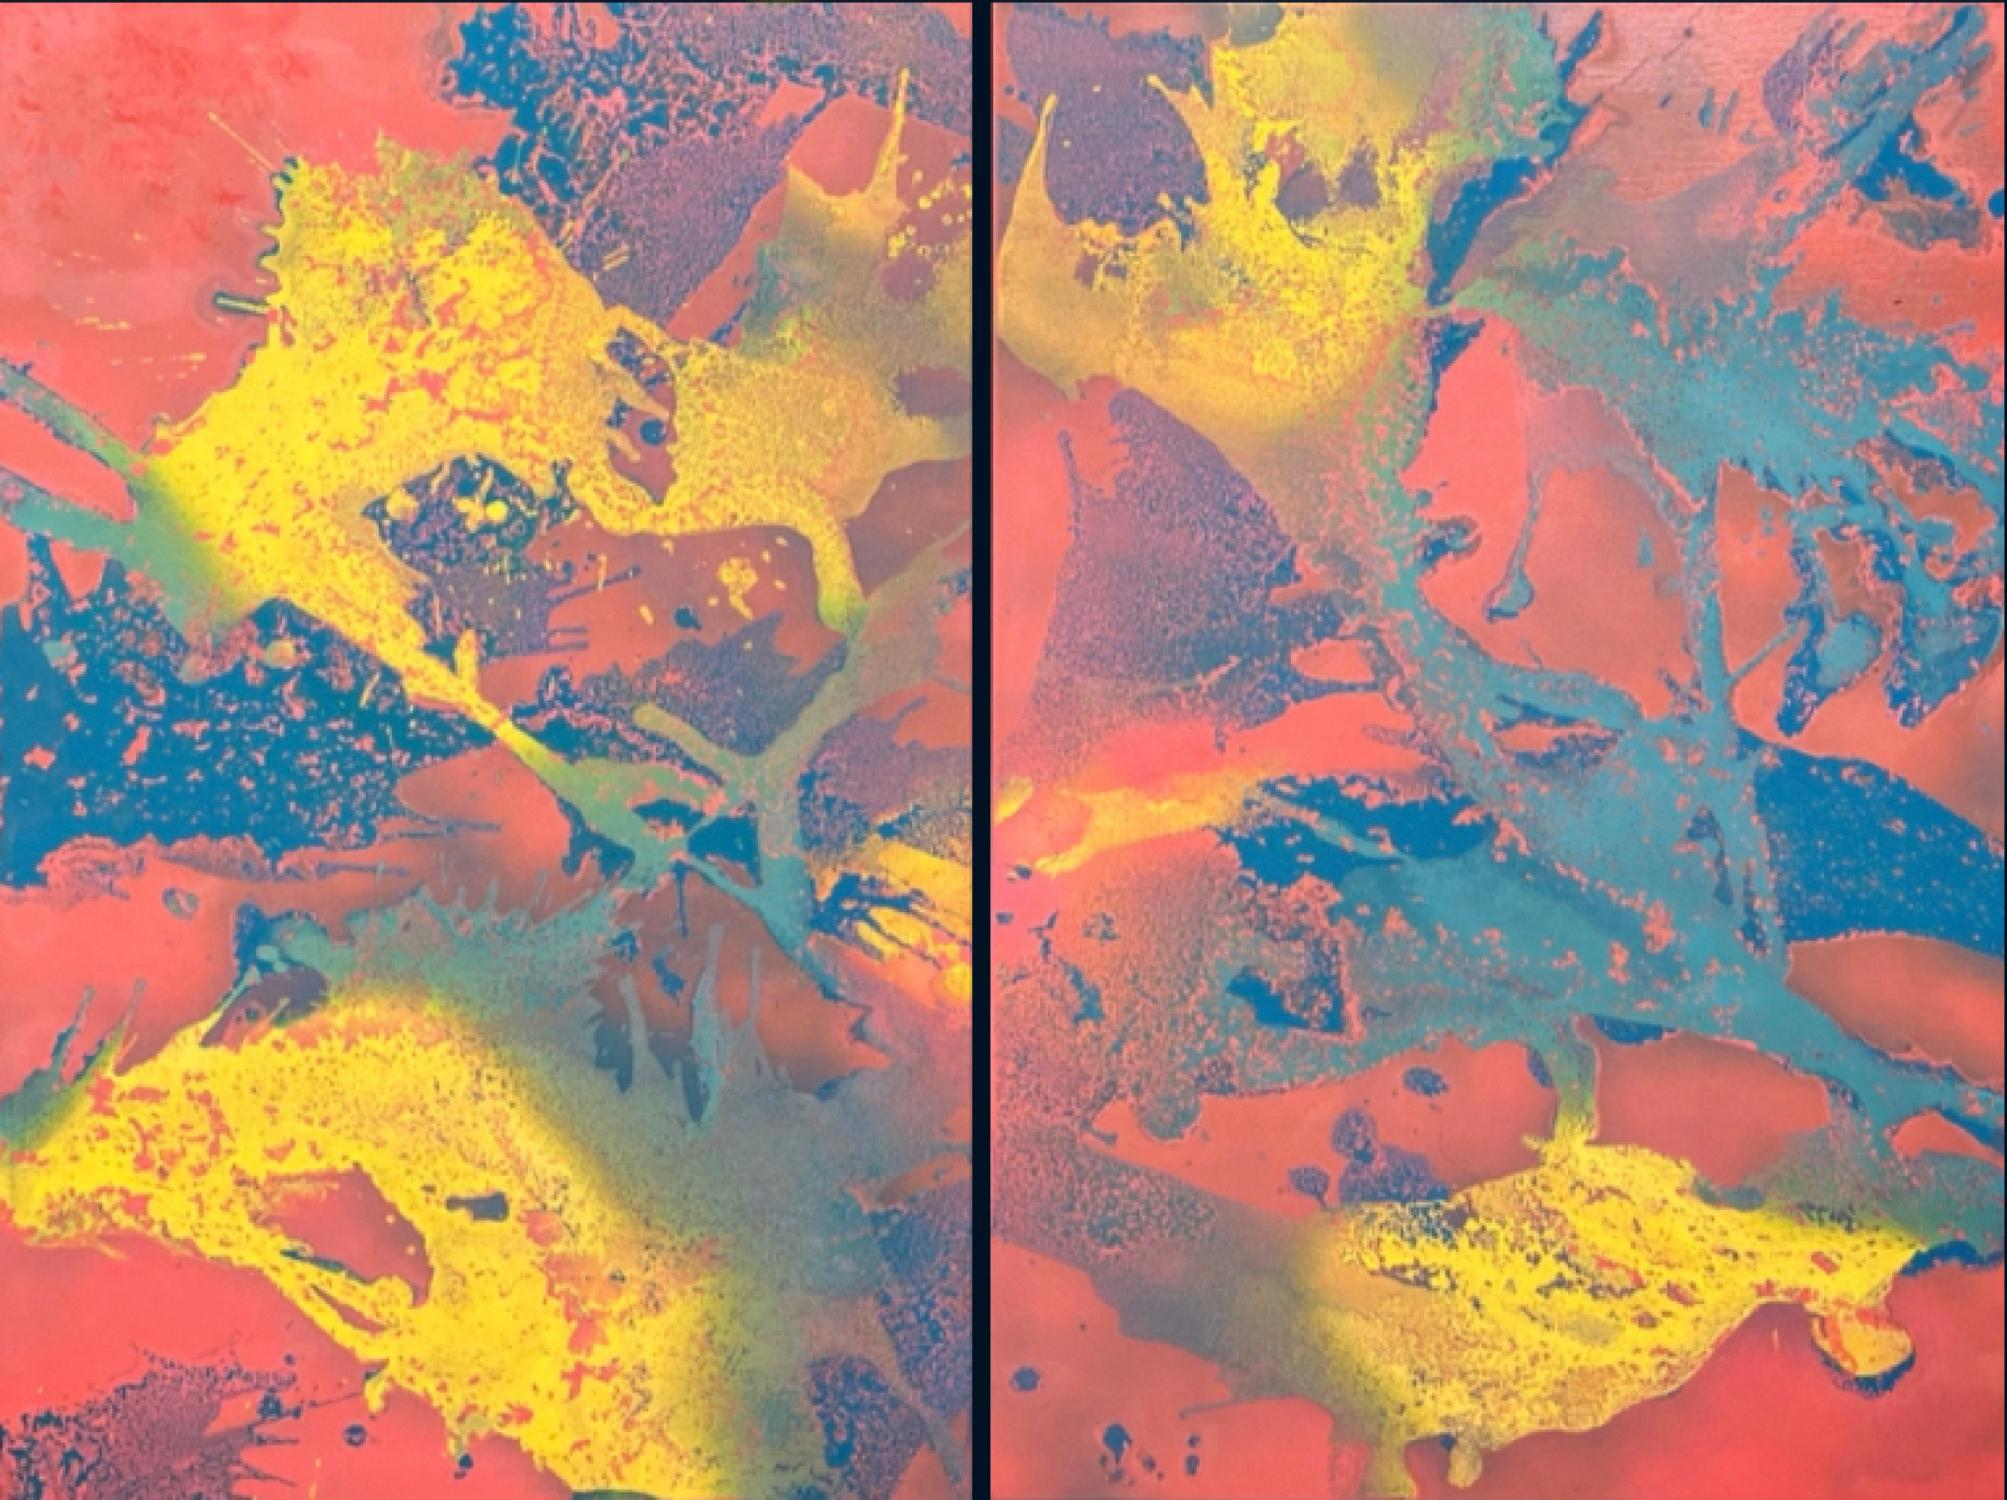 Erick Sandlin Abstract Painting - Give Us A Moment  Diptych  Two Panels 40" x 30 " Combined Abstract   Spray Paint